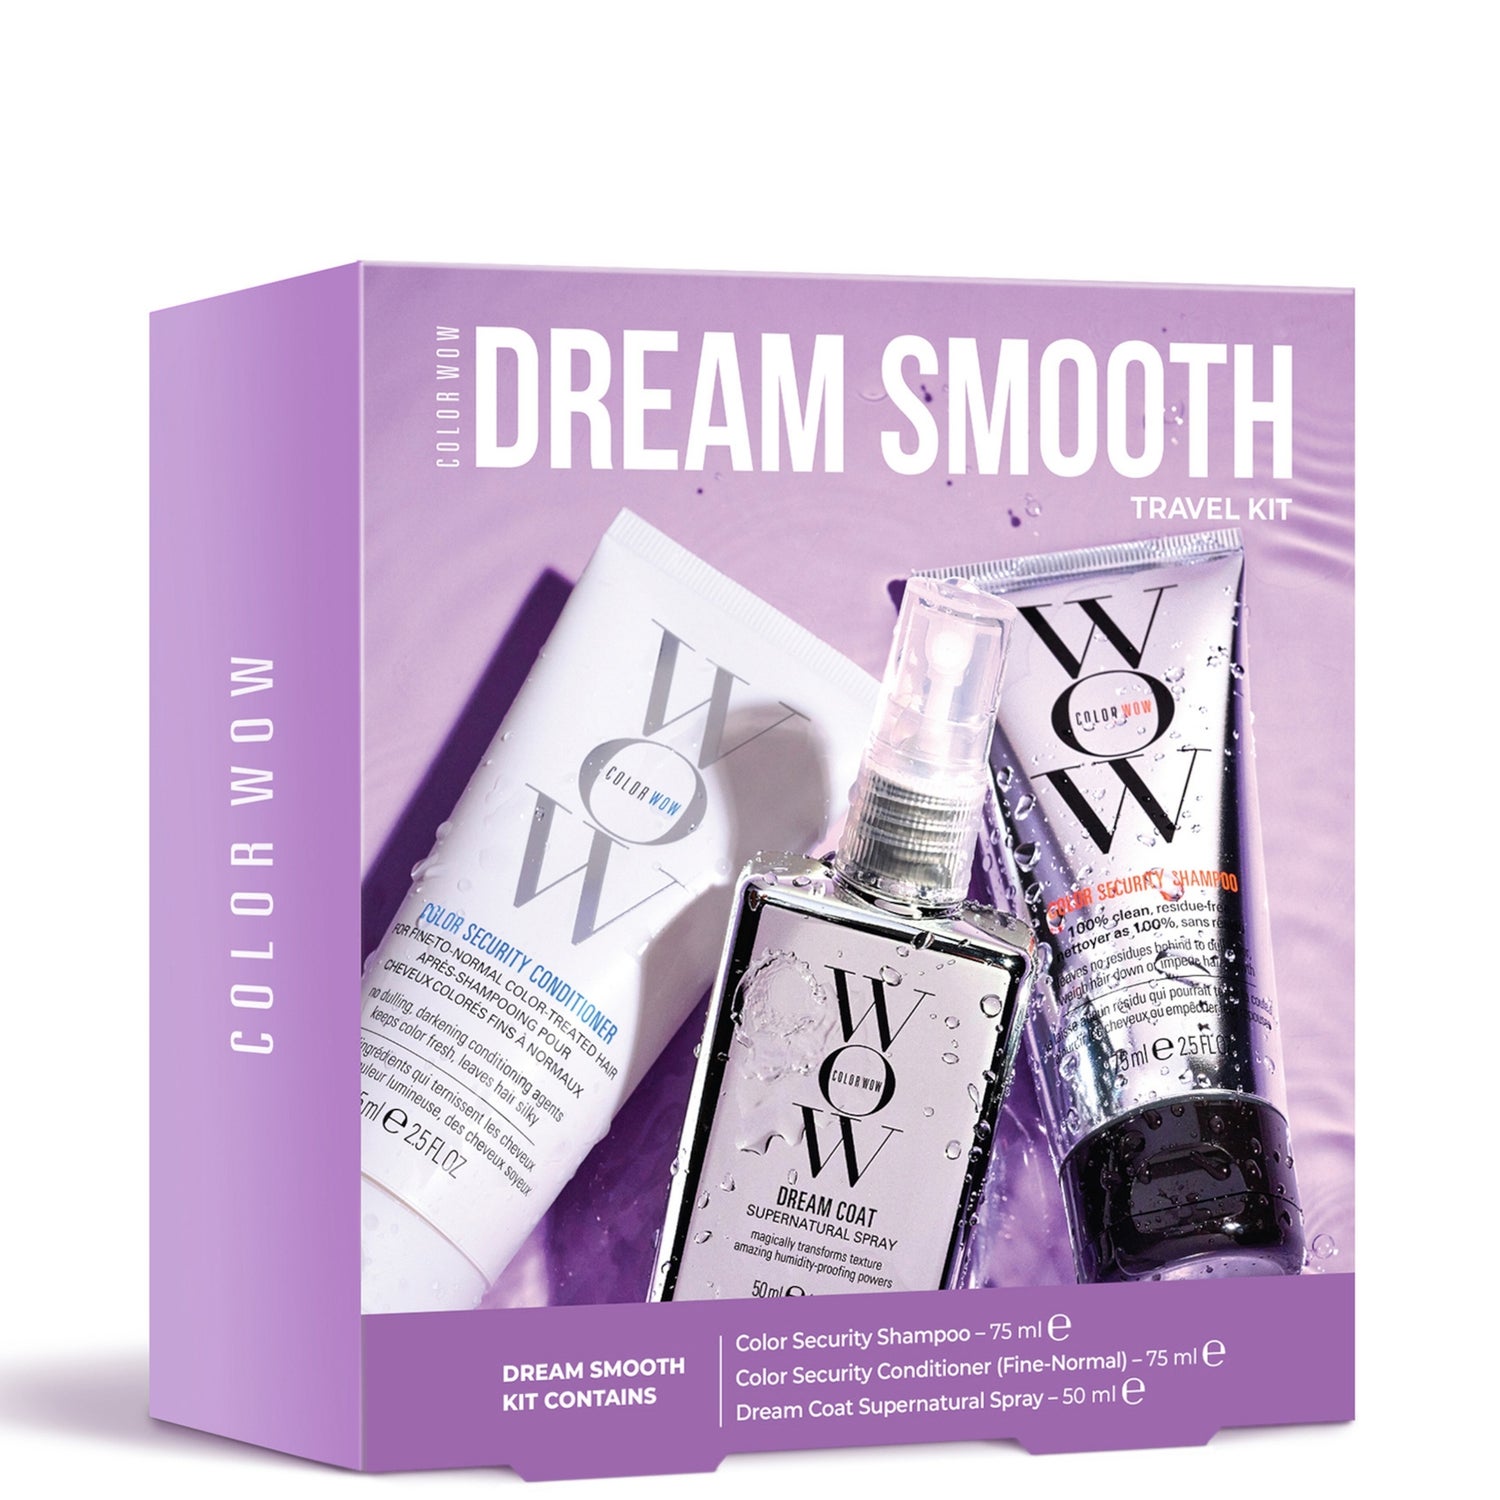 Color Wow Dream Smooth Kit (Worth £34.50)